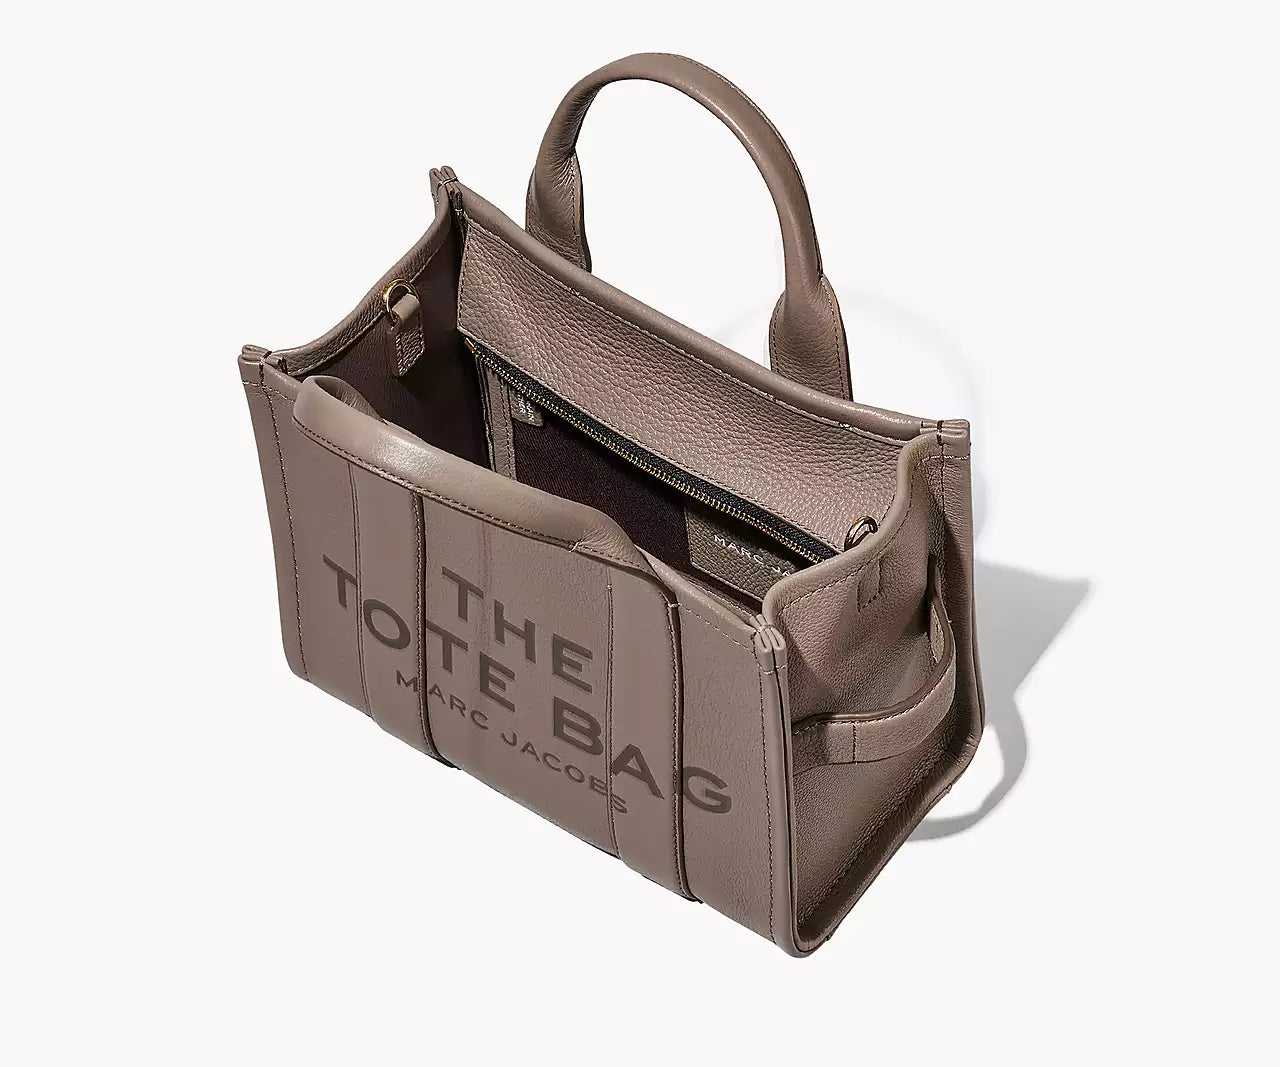 THE LEATHER MEDIUM TOTE BAG- Cement